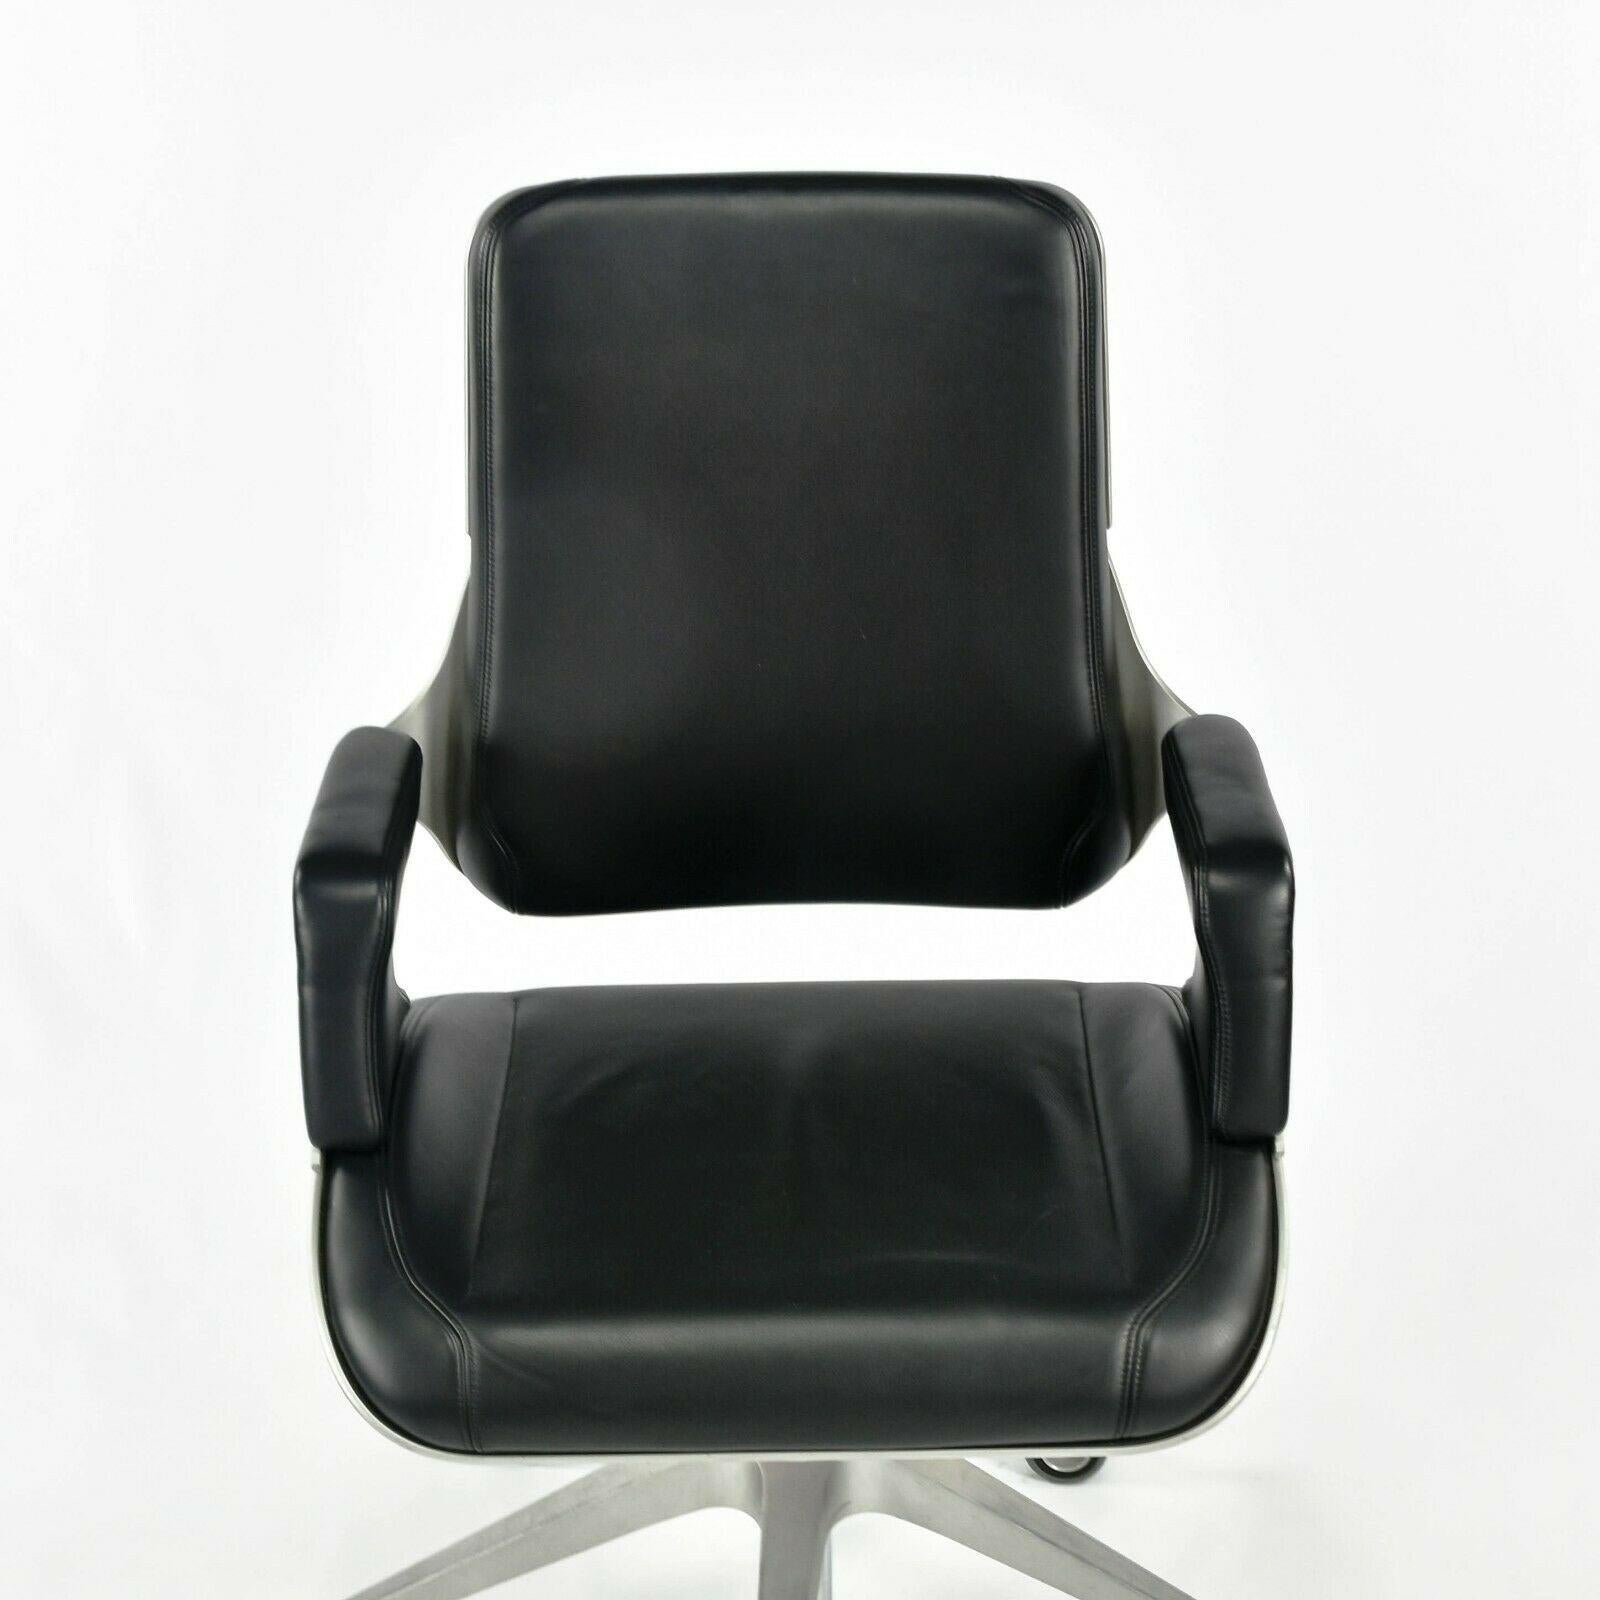 Contemporary 2008 Interstuhl Silver 262S Office Desk Chair in Black Leather by Hadi Teherani For Sale